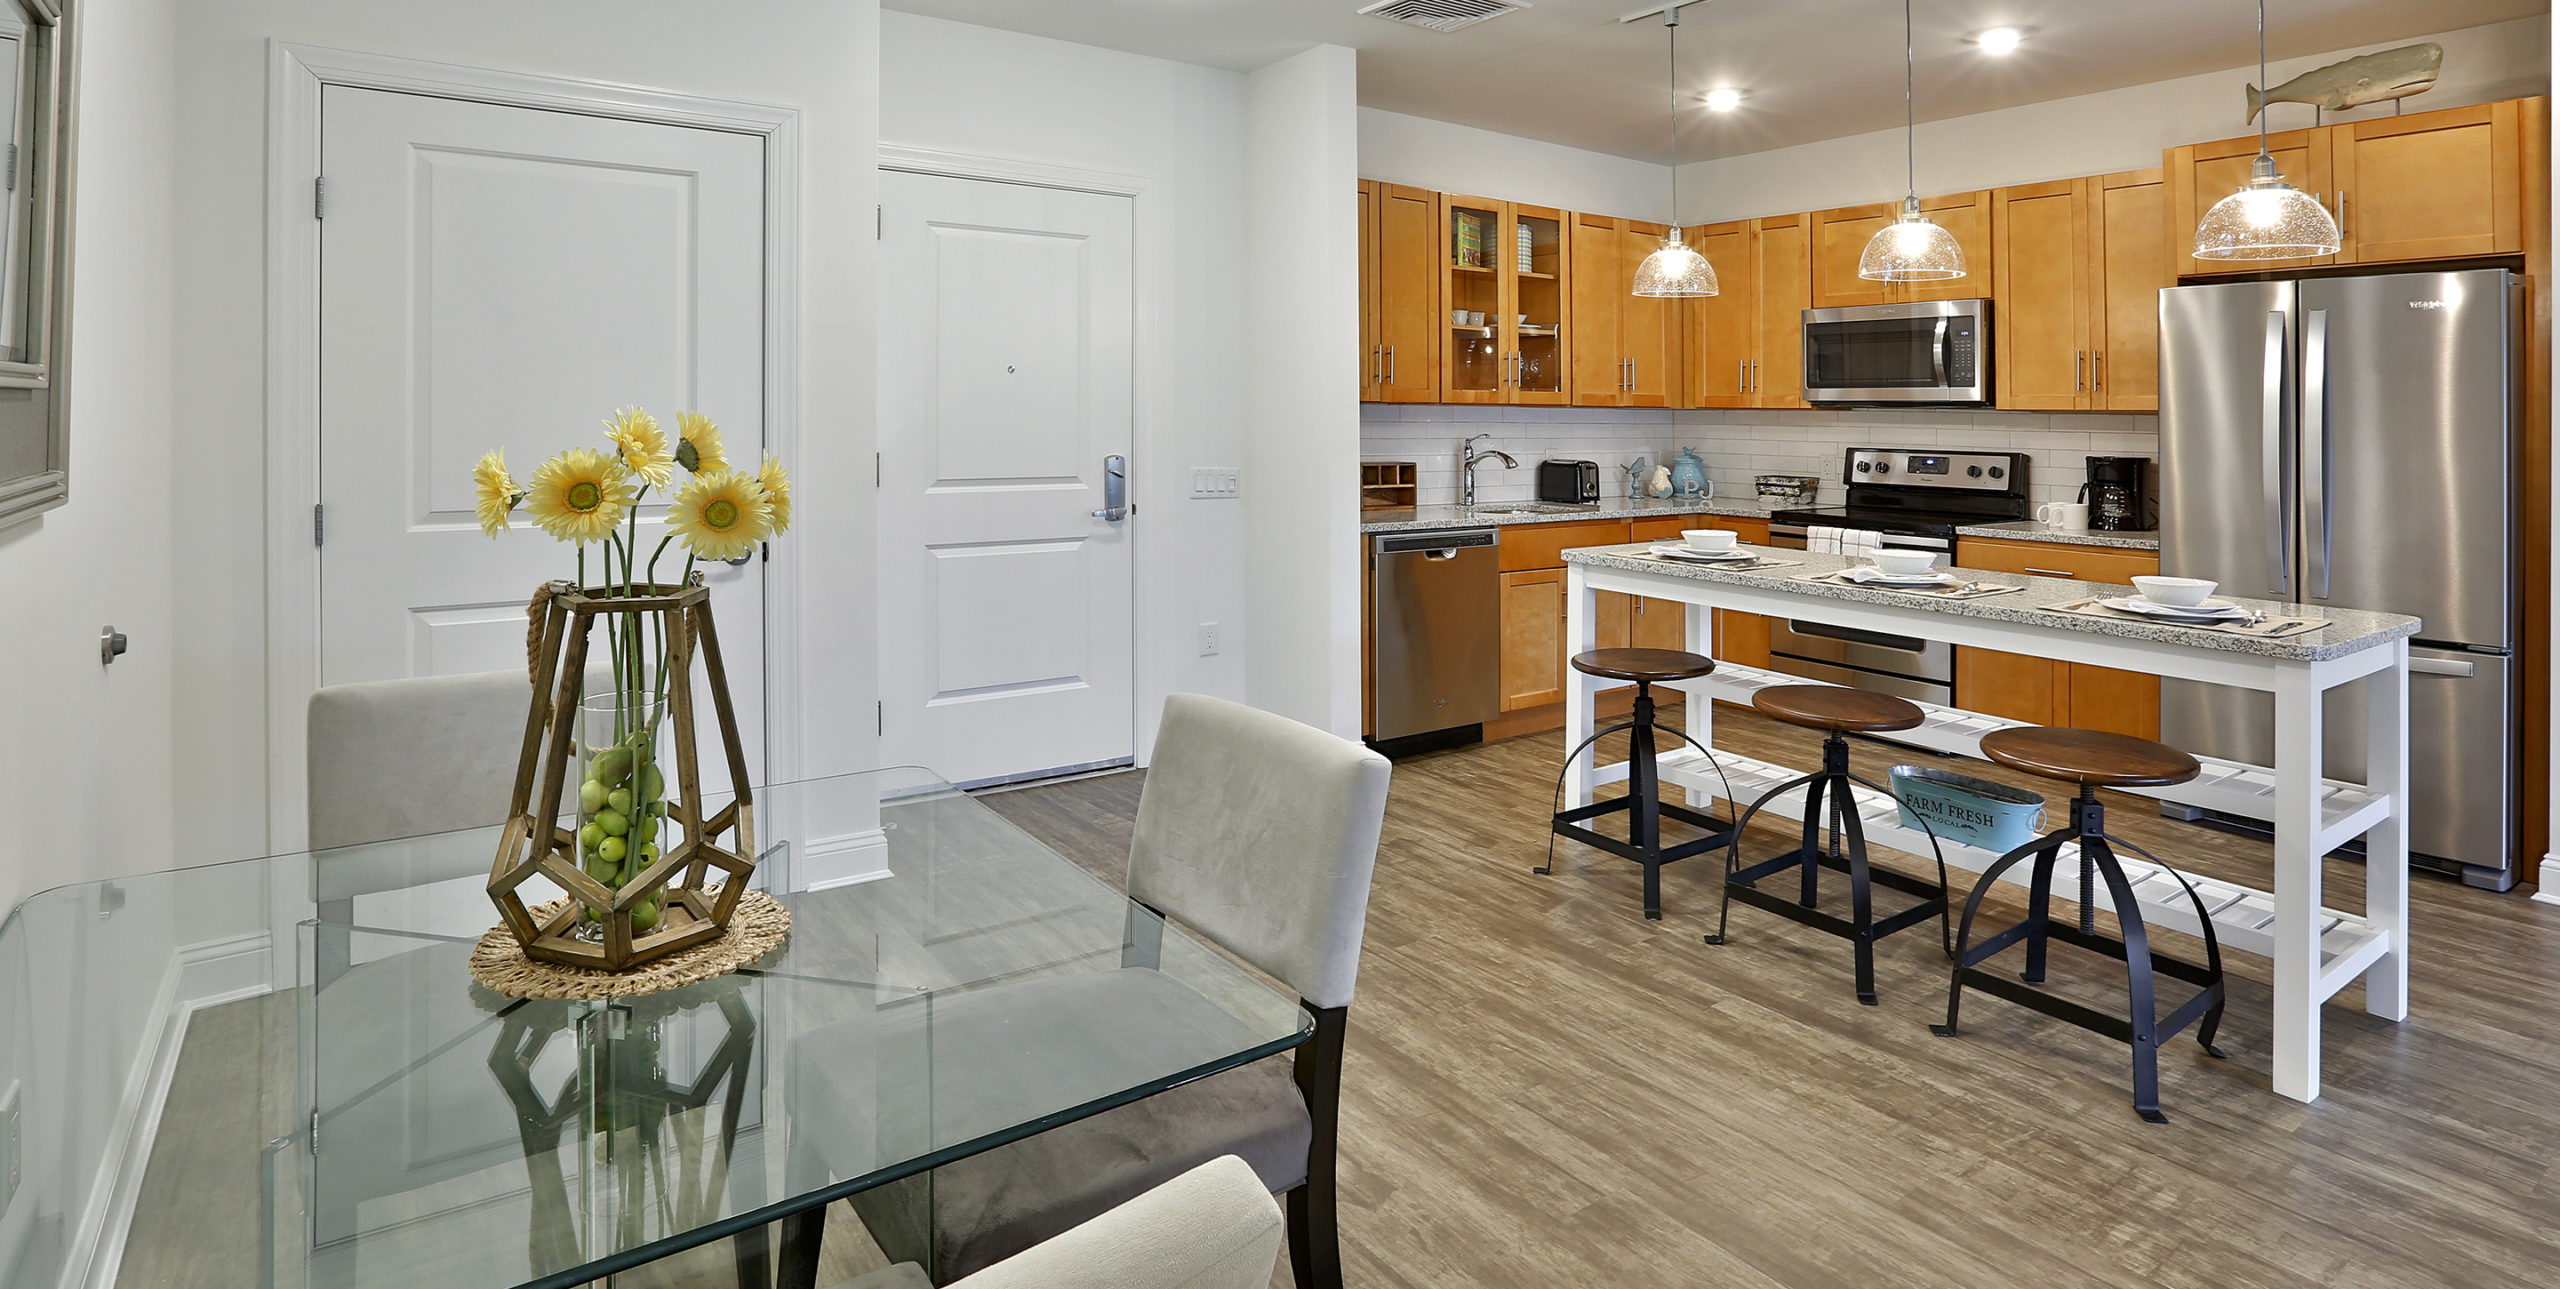 Kitchen of apartment at The Shipyard at Port Jeff Harbor with stainless steel appliances, an island with three stools, and a small side table with two chairs